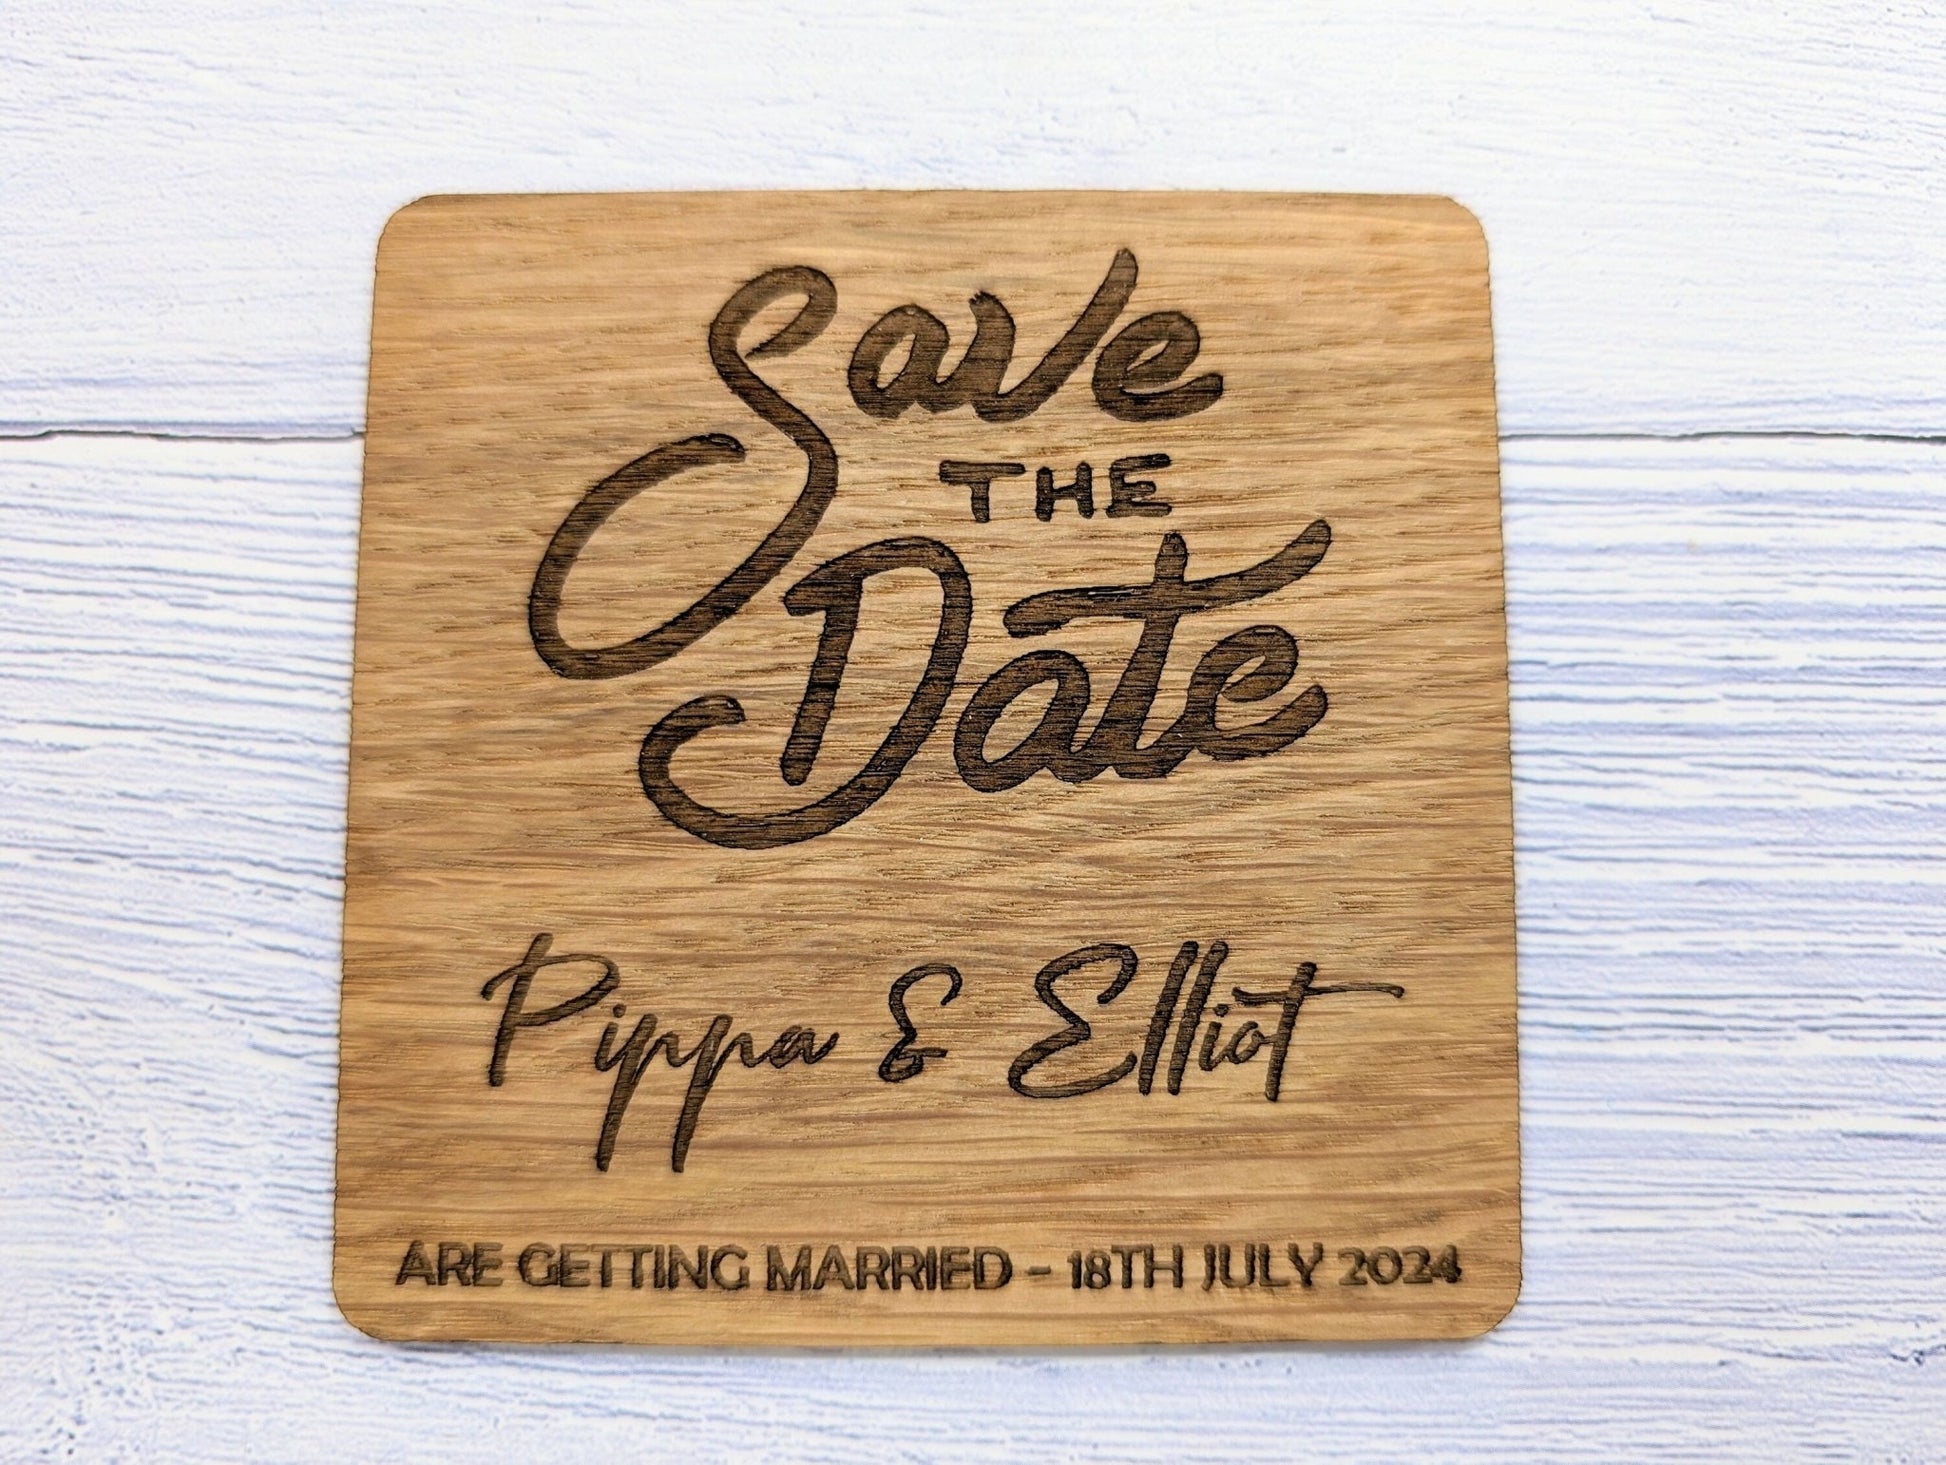 Personalised 'Save The Date' Wooden Coasters - Unique Wedding Favors - CherryGroveCraft